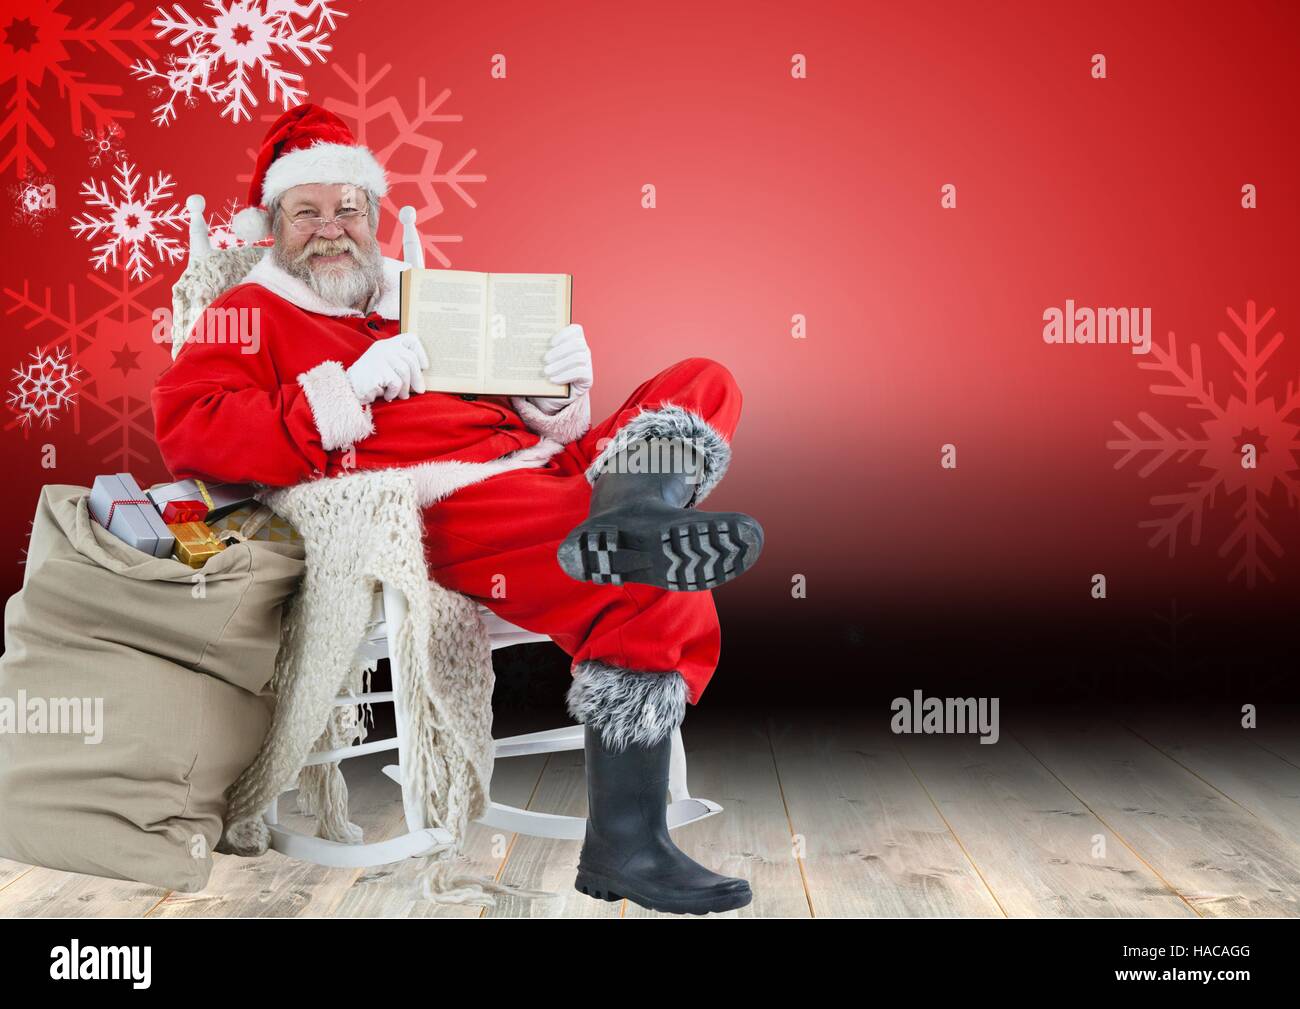 Santa claus sitting on chair and showing bible Stock Photo